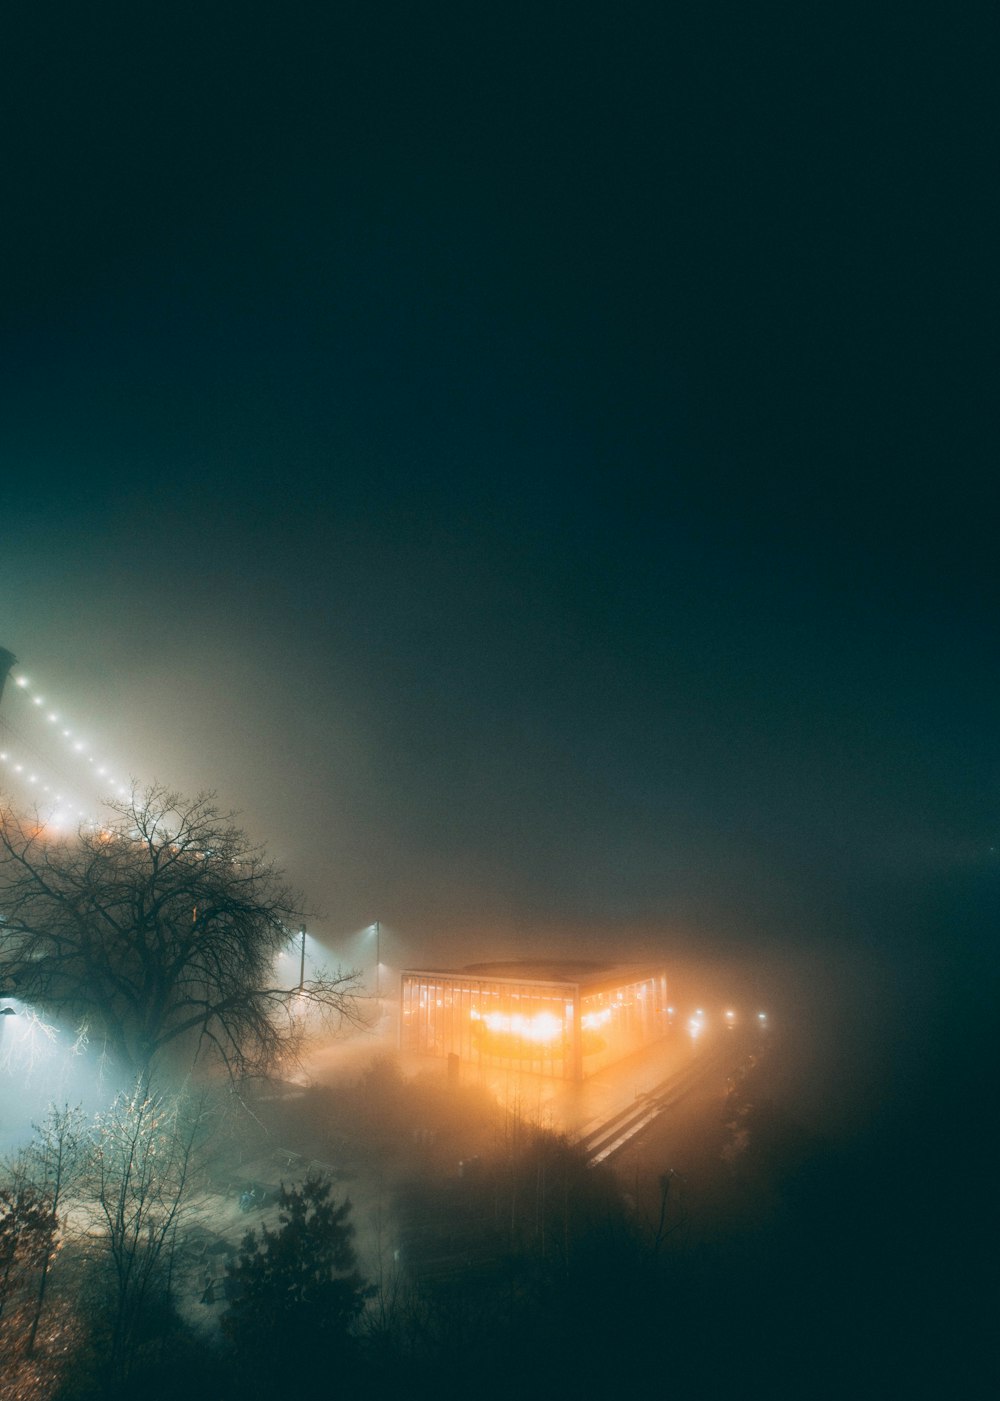 a foggy night with a train on the tracks